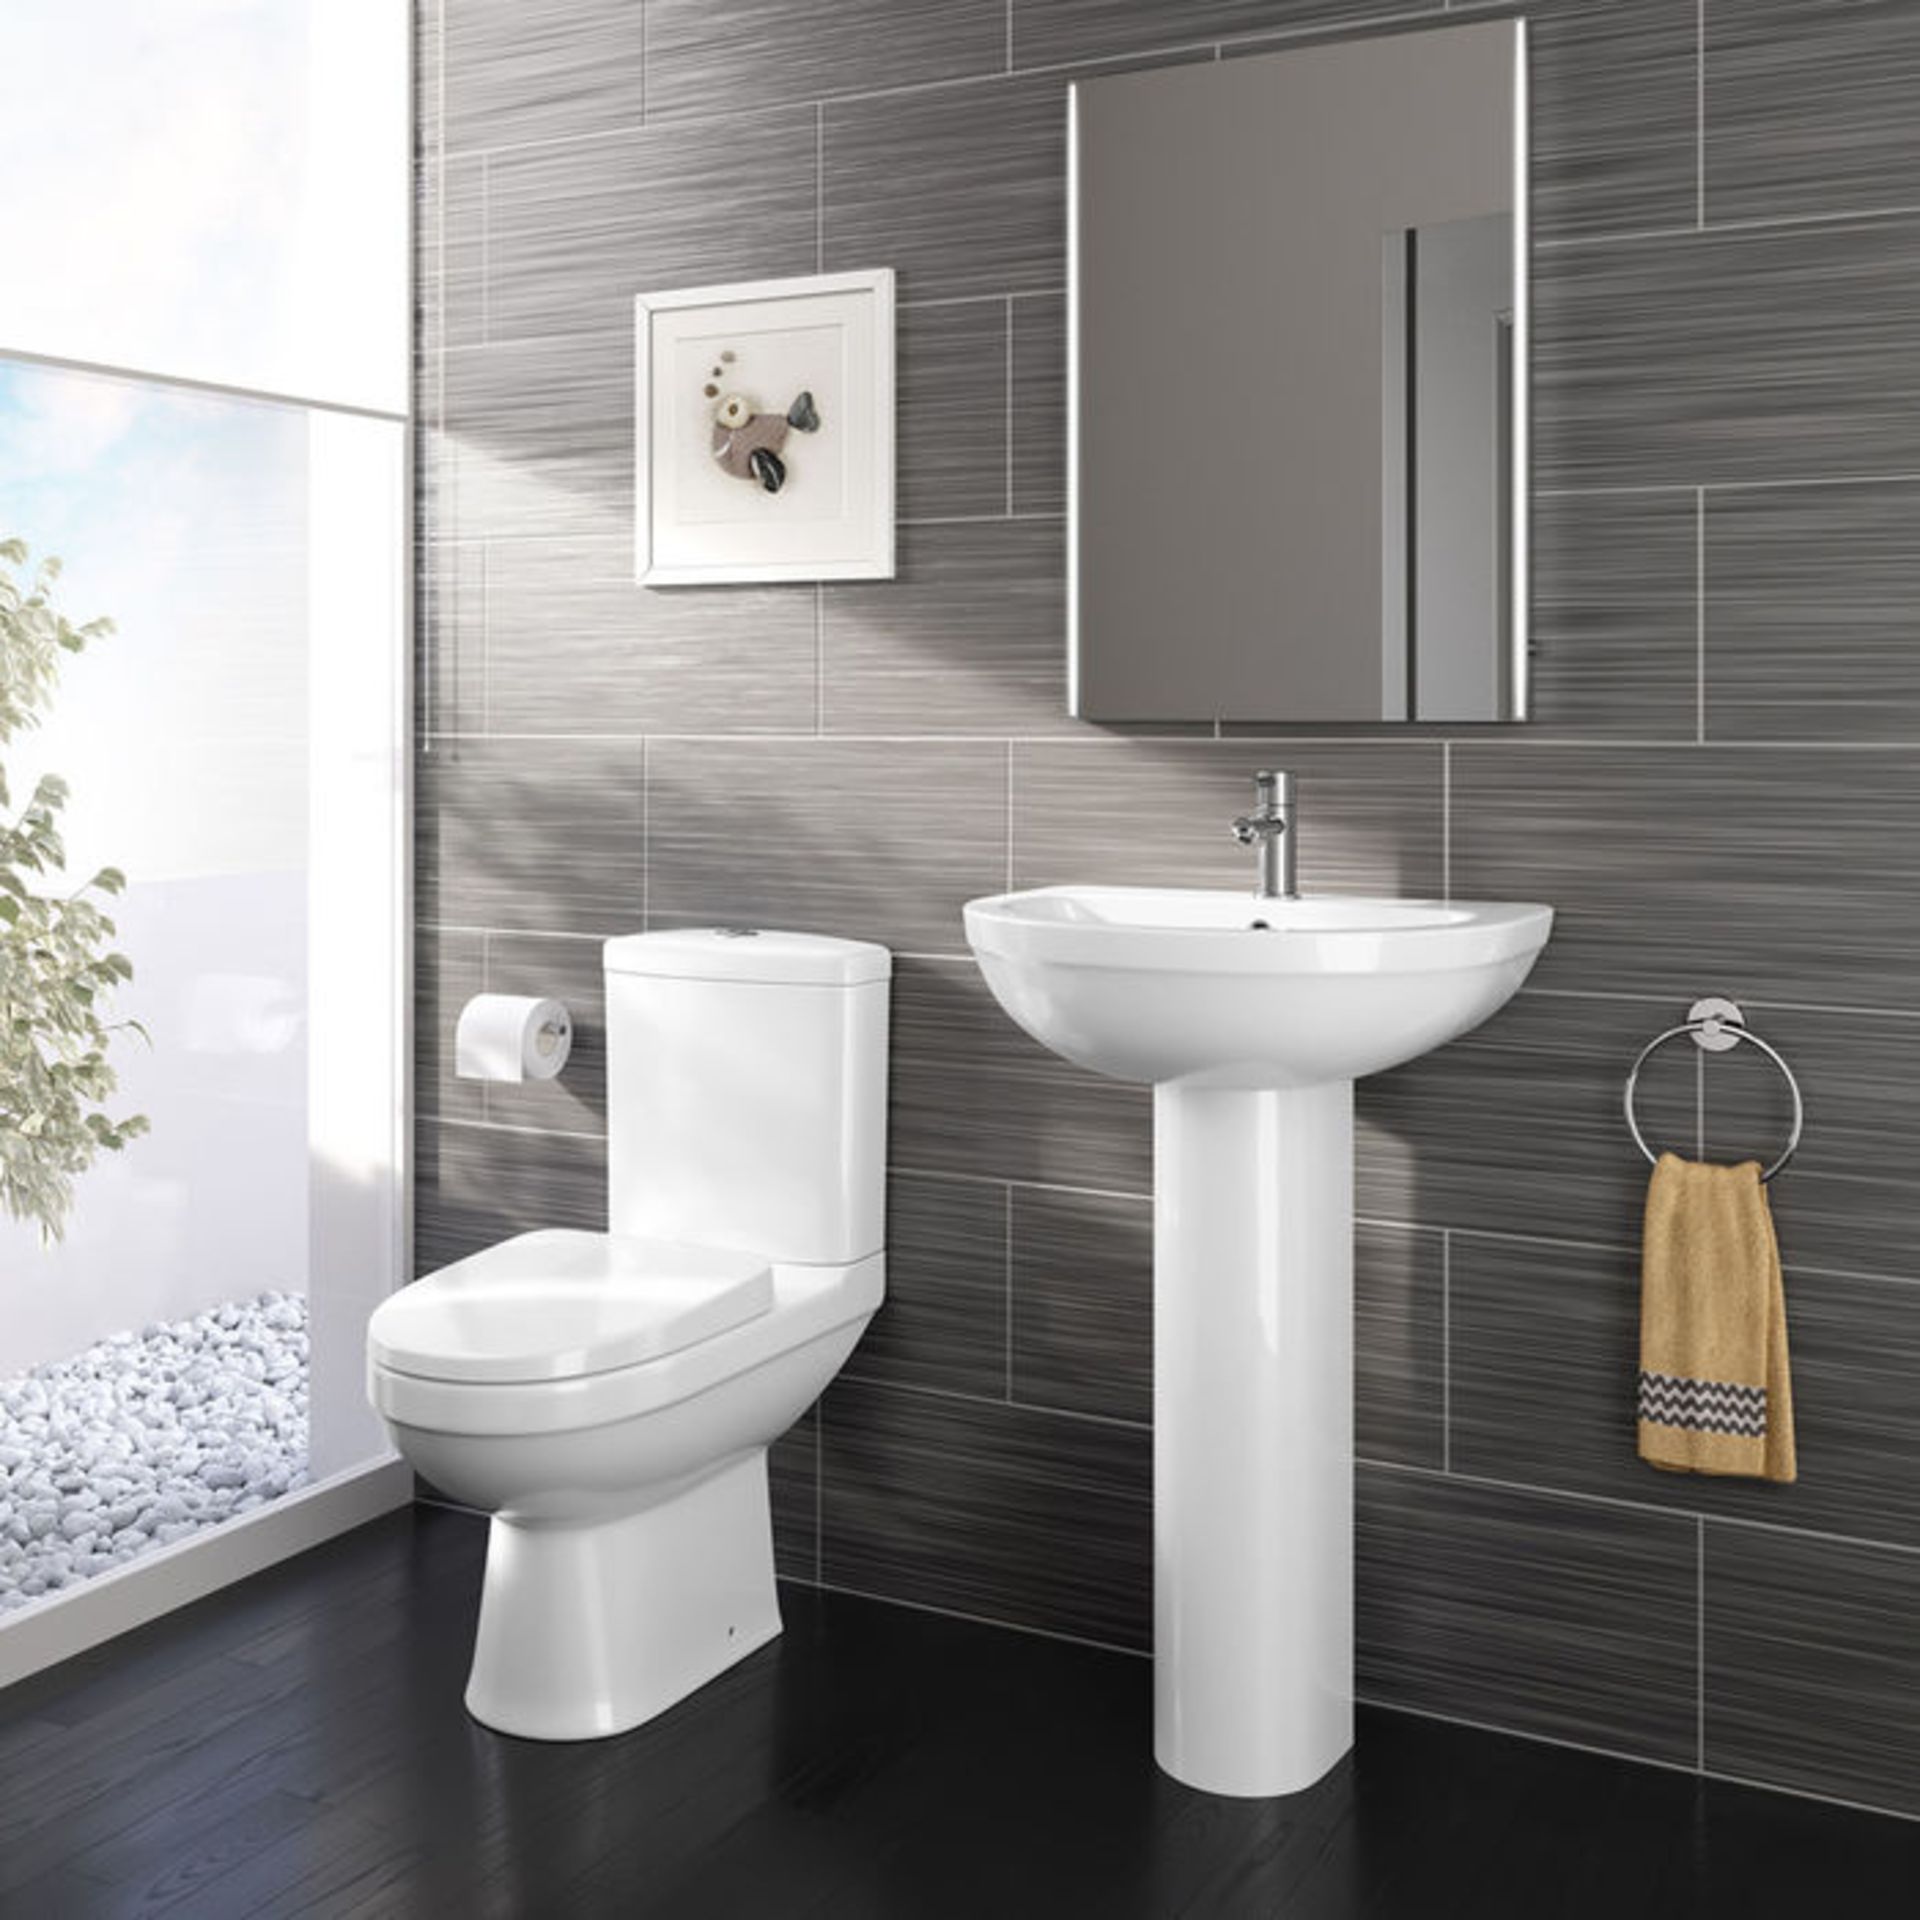 (AL180) Sabrosa II Close Coupled Toilet & Cistern inc Soft Close Seat. Made from White Vitreous - Image 2 of 4